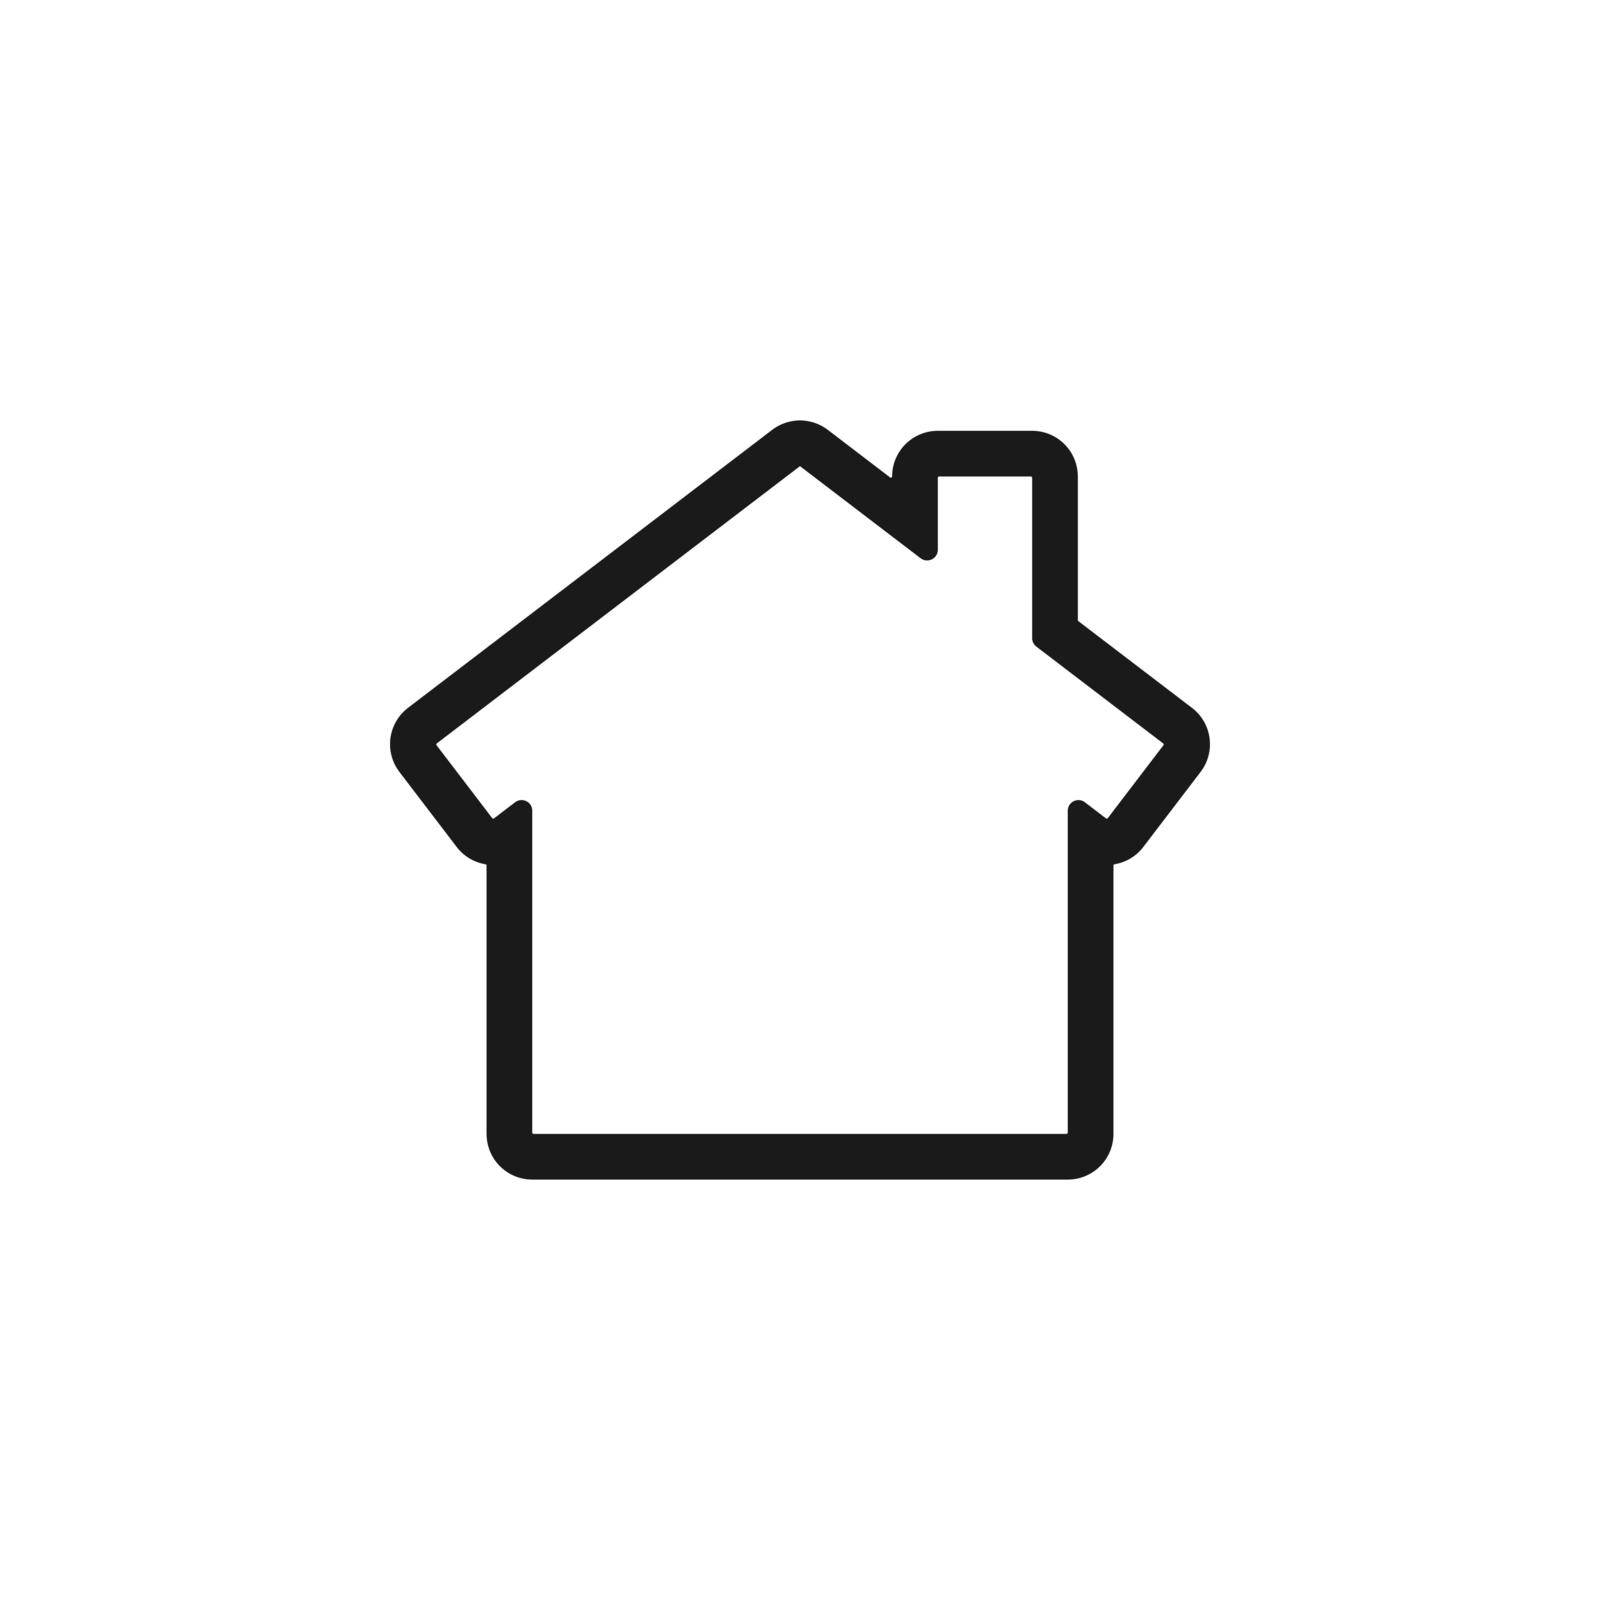 Home icon. House symbol. Simple vector illustration EPS 10